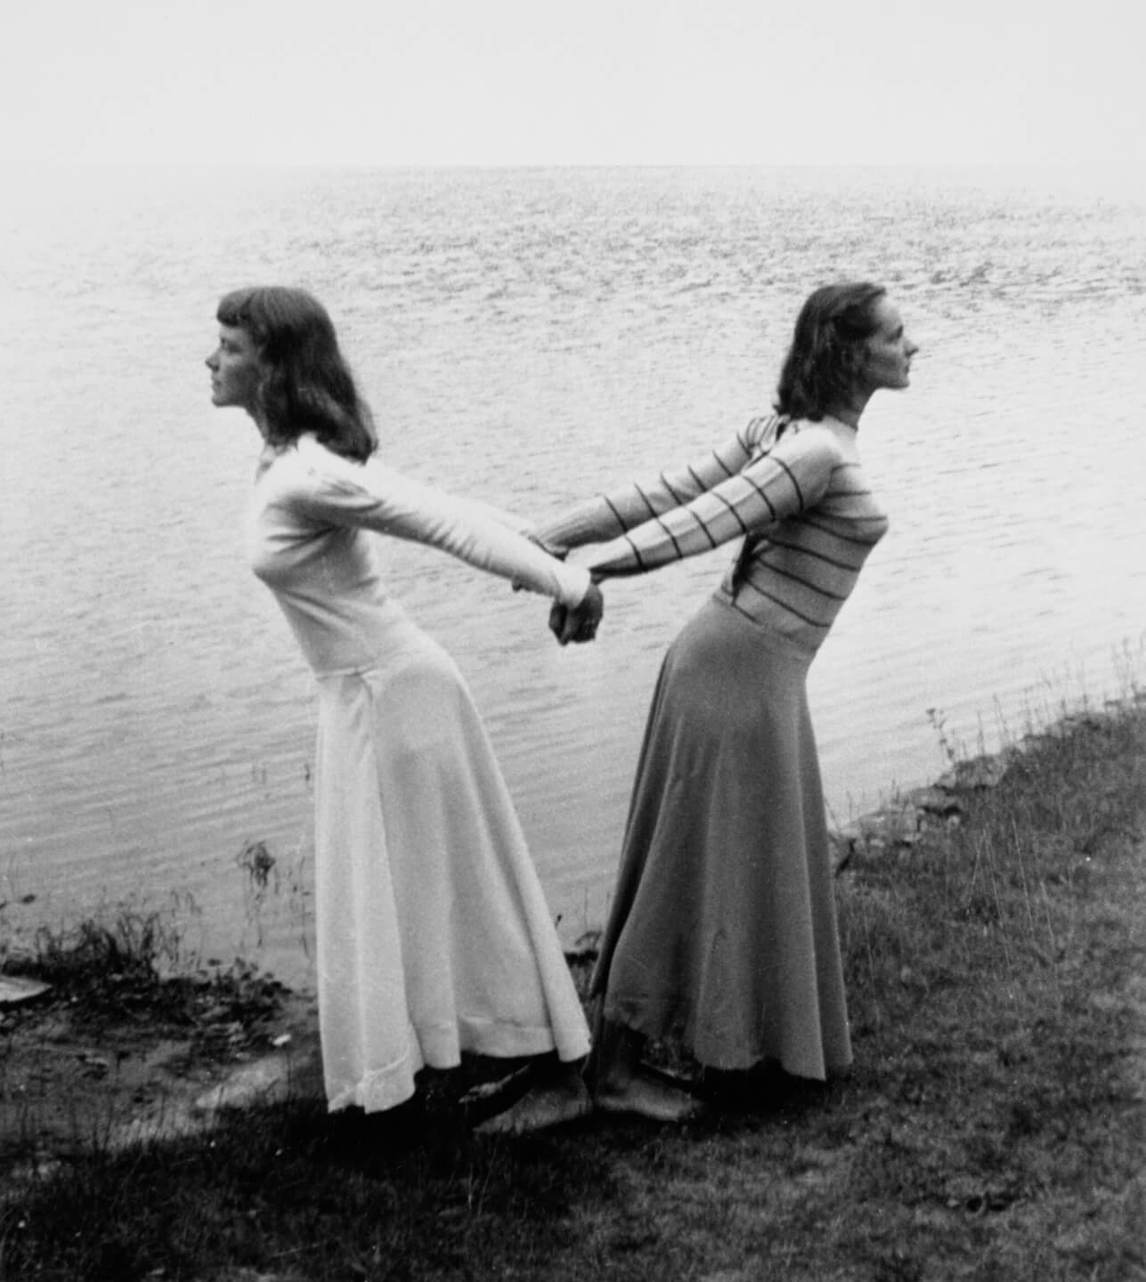 Françoise Sullivan and Jeanne Renaud in Duality, 1948.